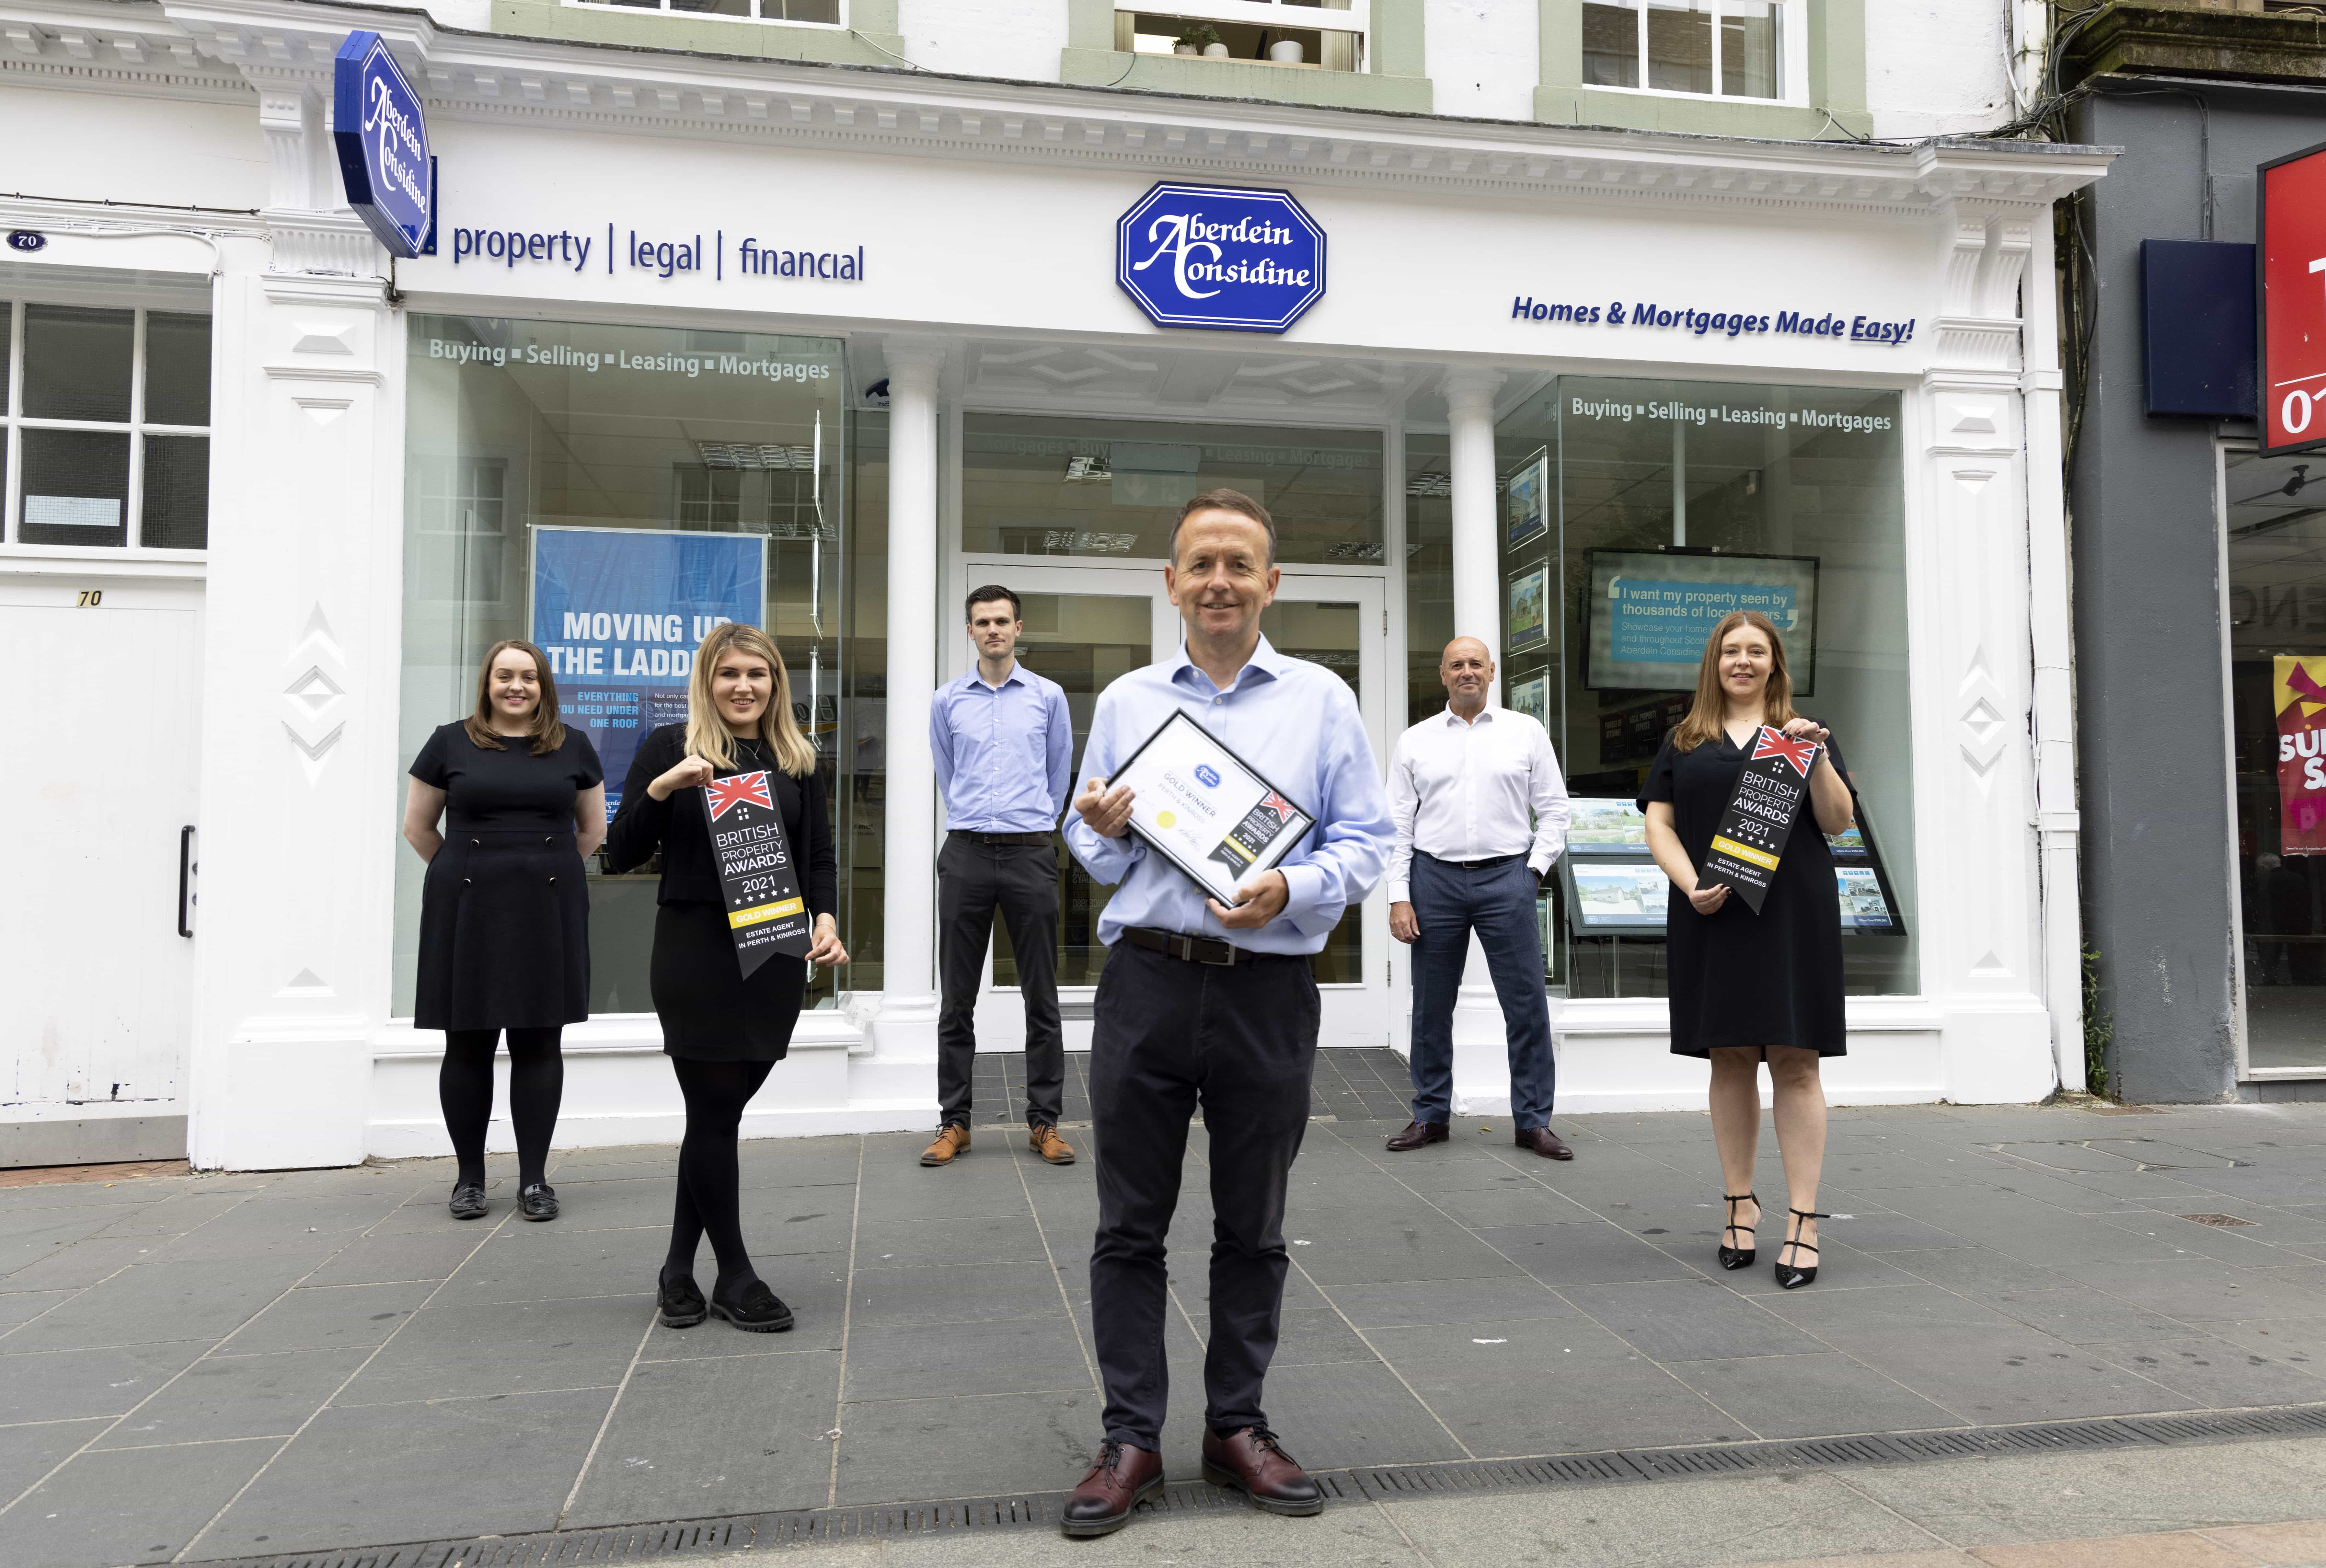 Aberdein Considine named as the top estate agent in Perth & Kinross